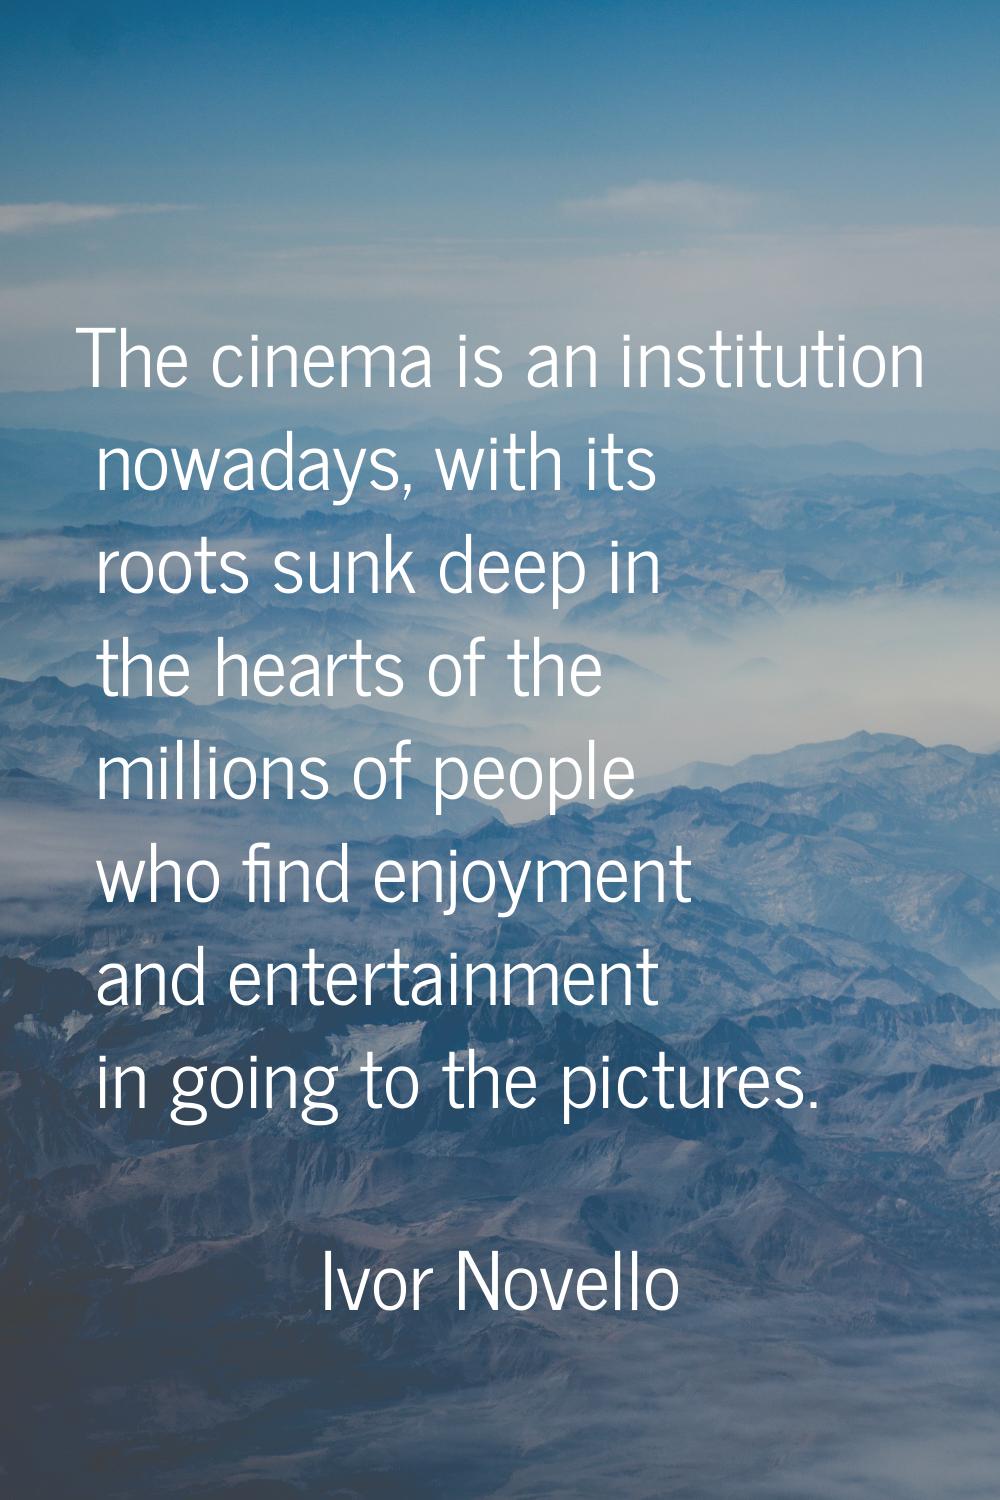 The cinema is an institution nowadays, with its roots sunk deep in the hearts of the millions of pe